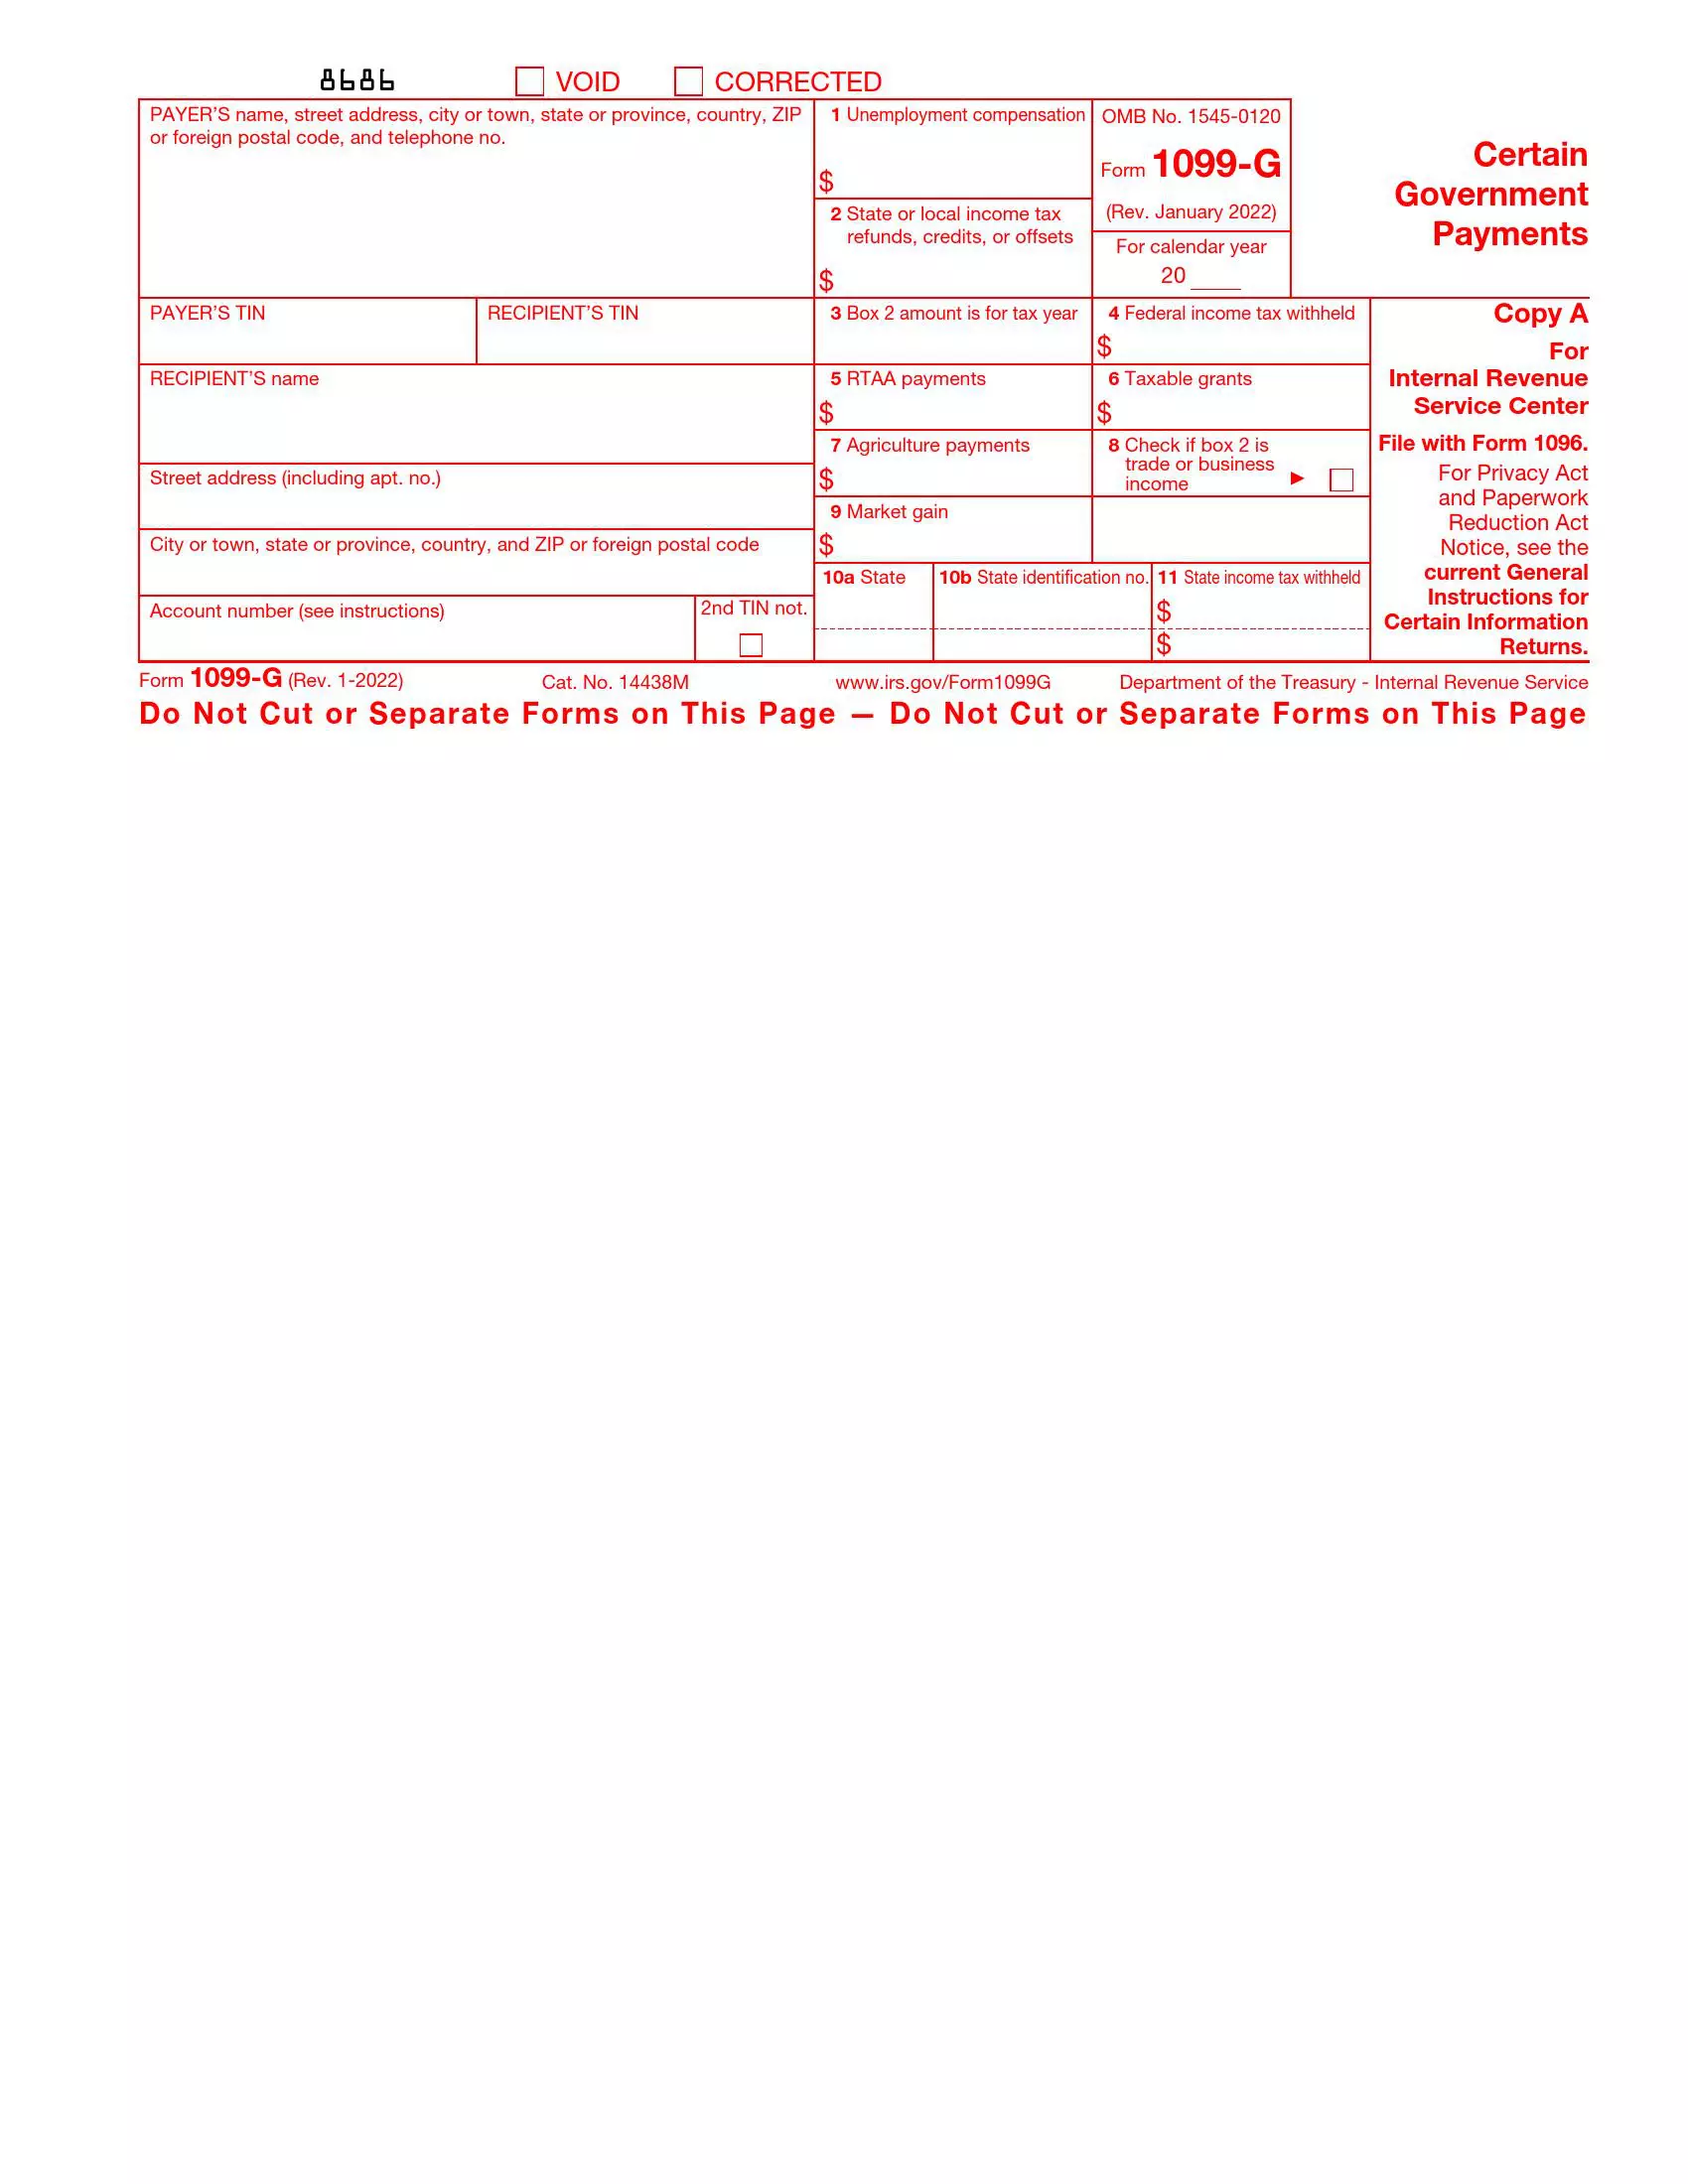 irs form 1099-g rev 01 2022 preview